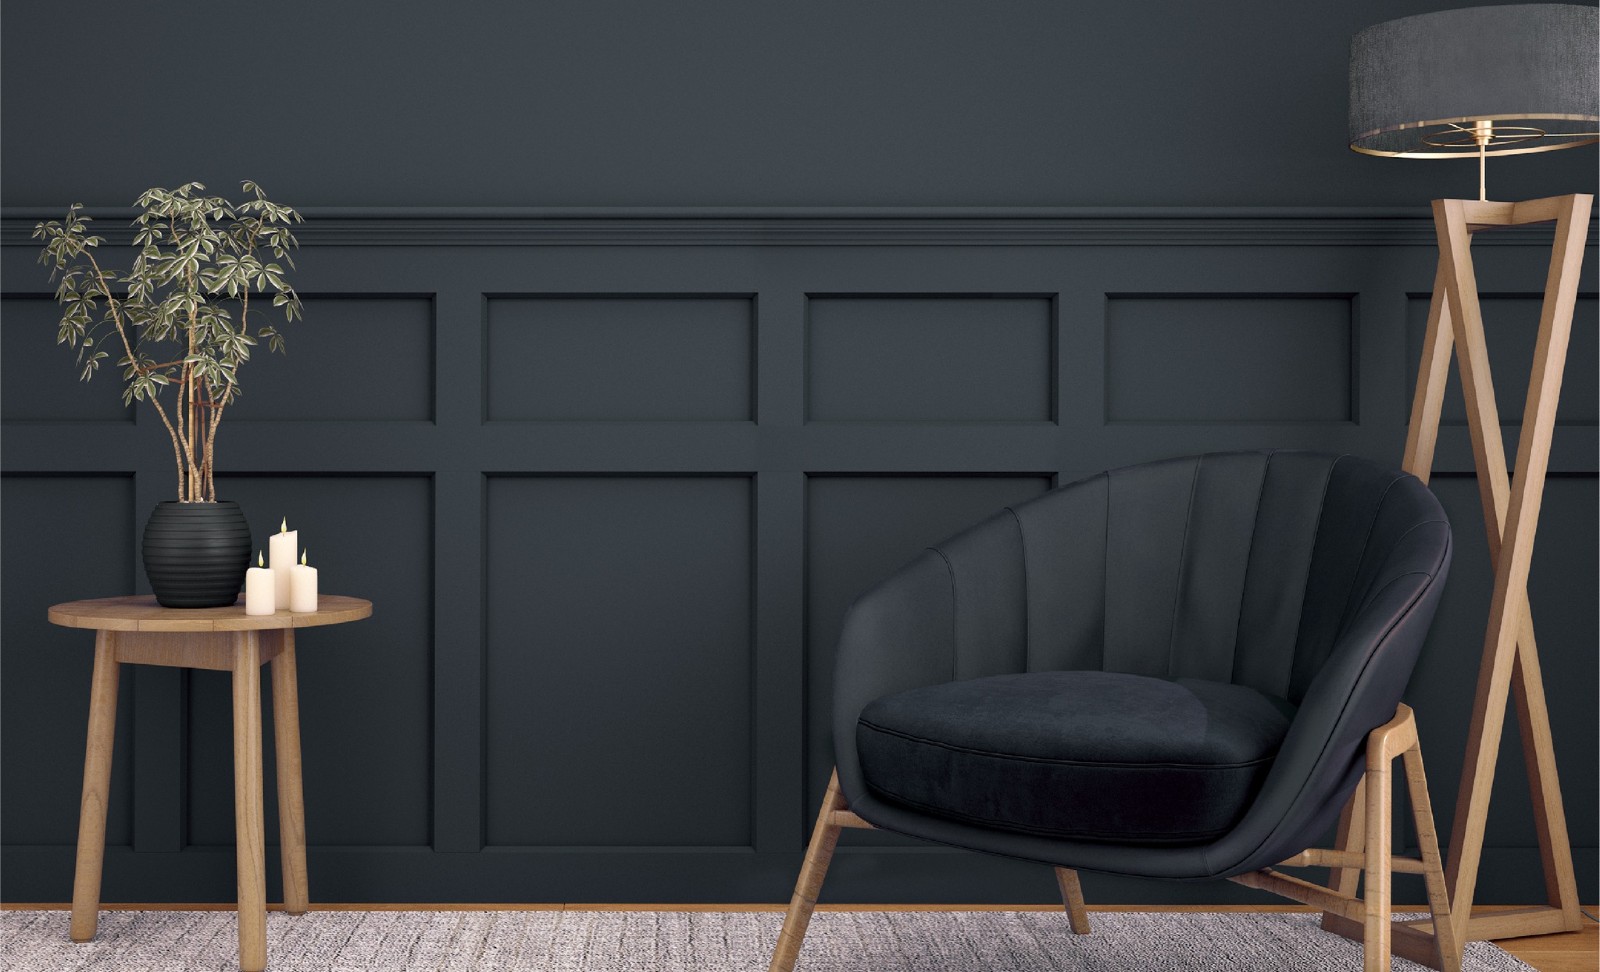 Introducing Deanta's Wall Panelling: A Closer Look at the Stunning Range